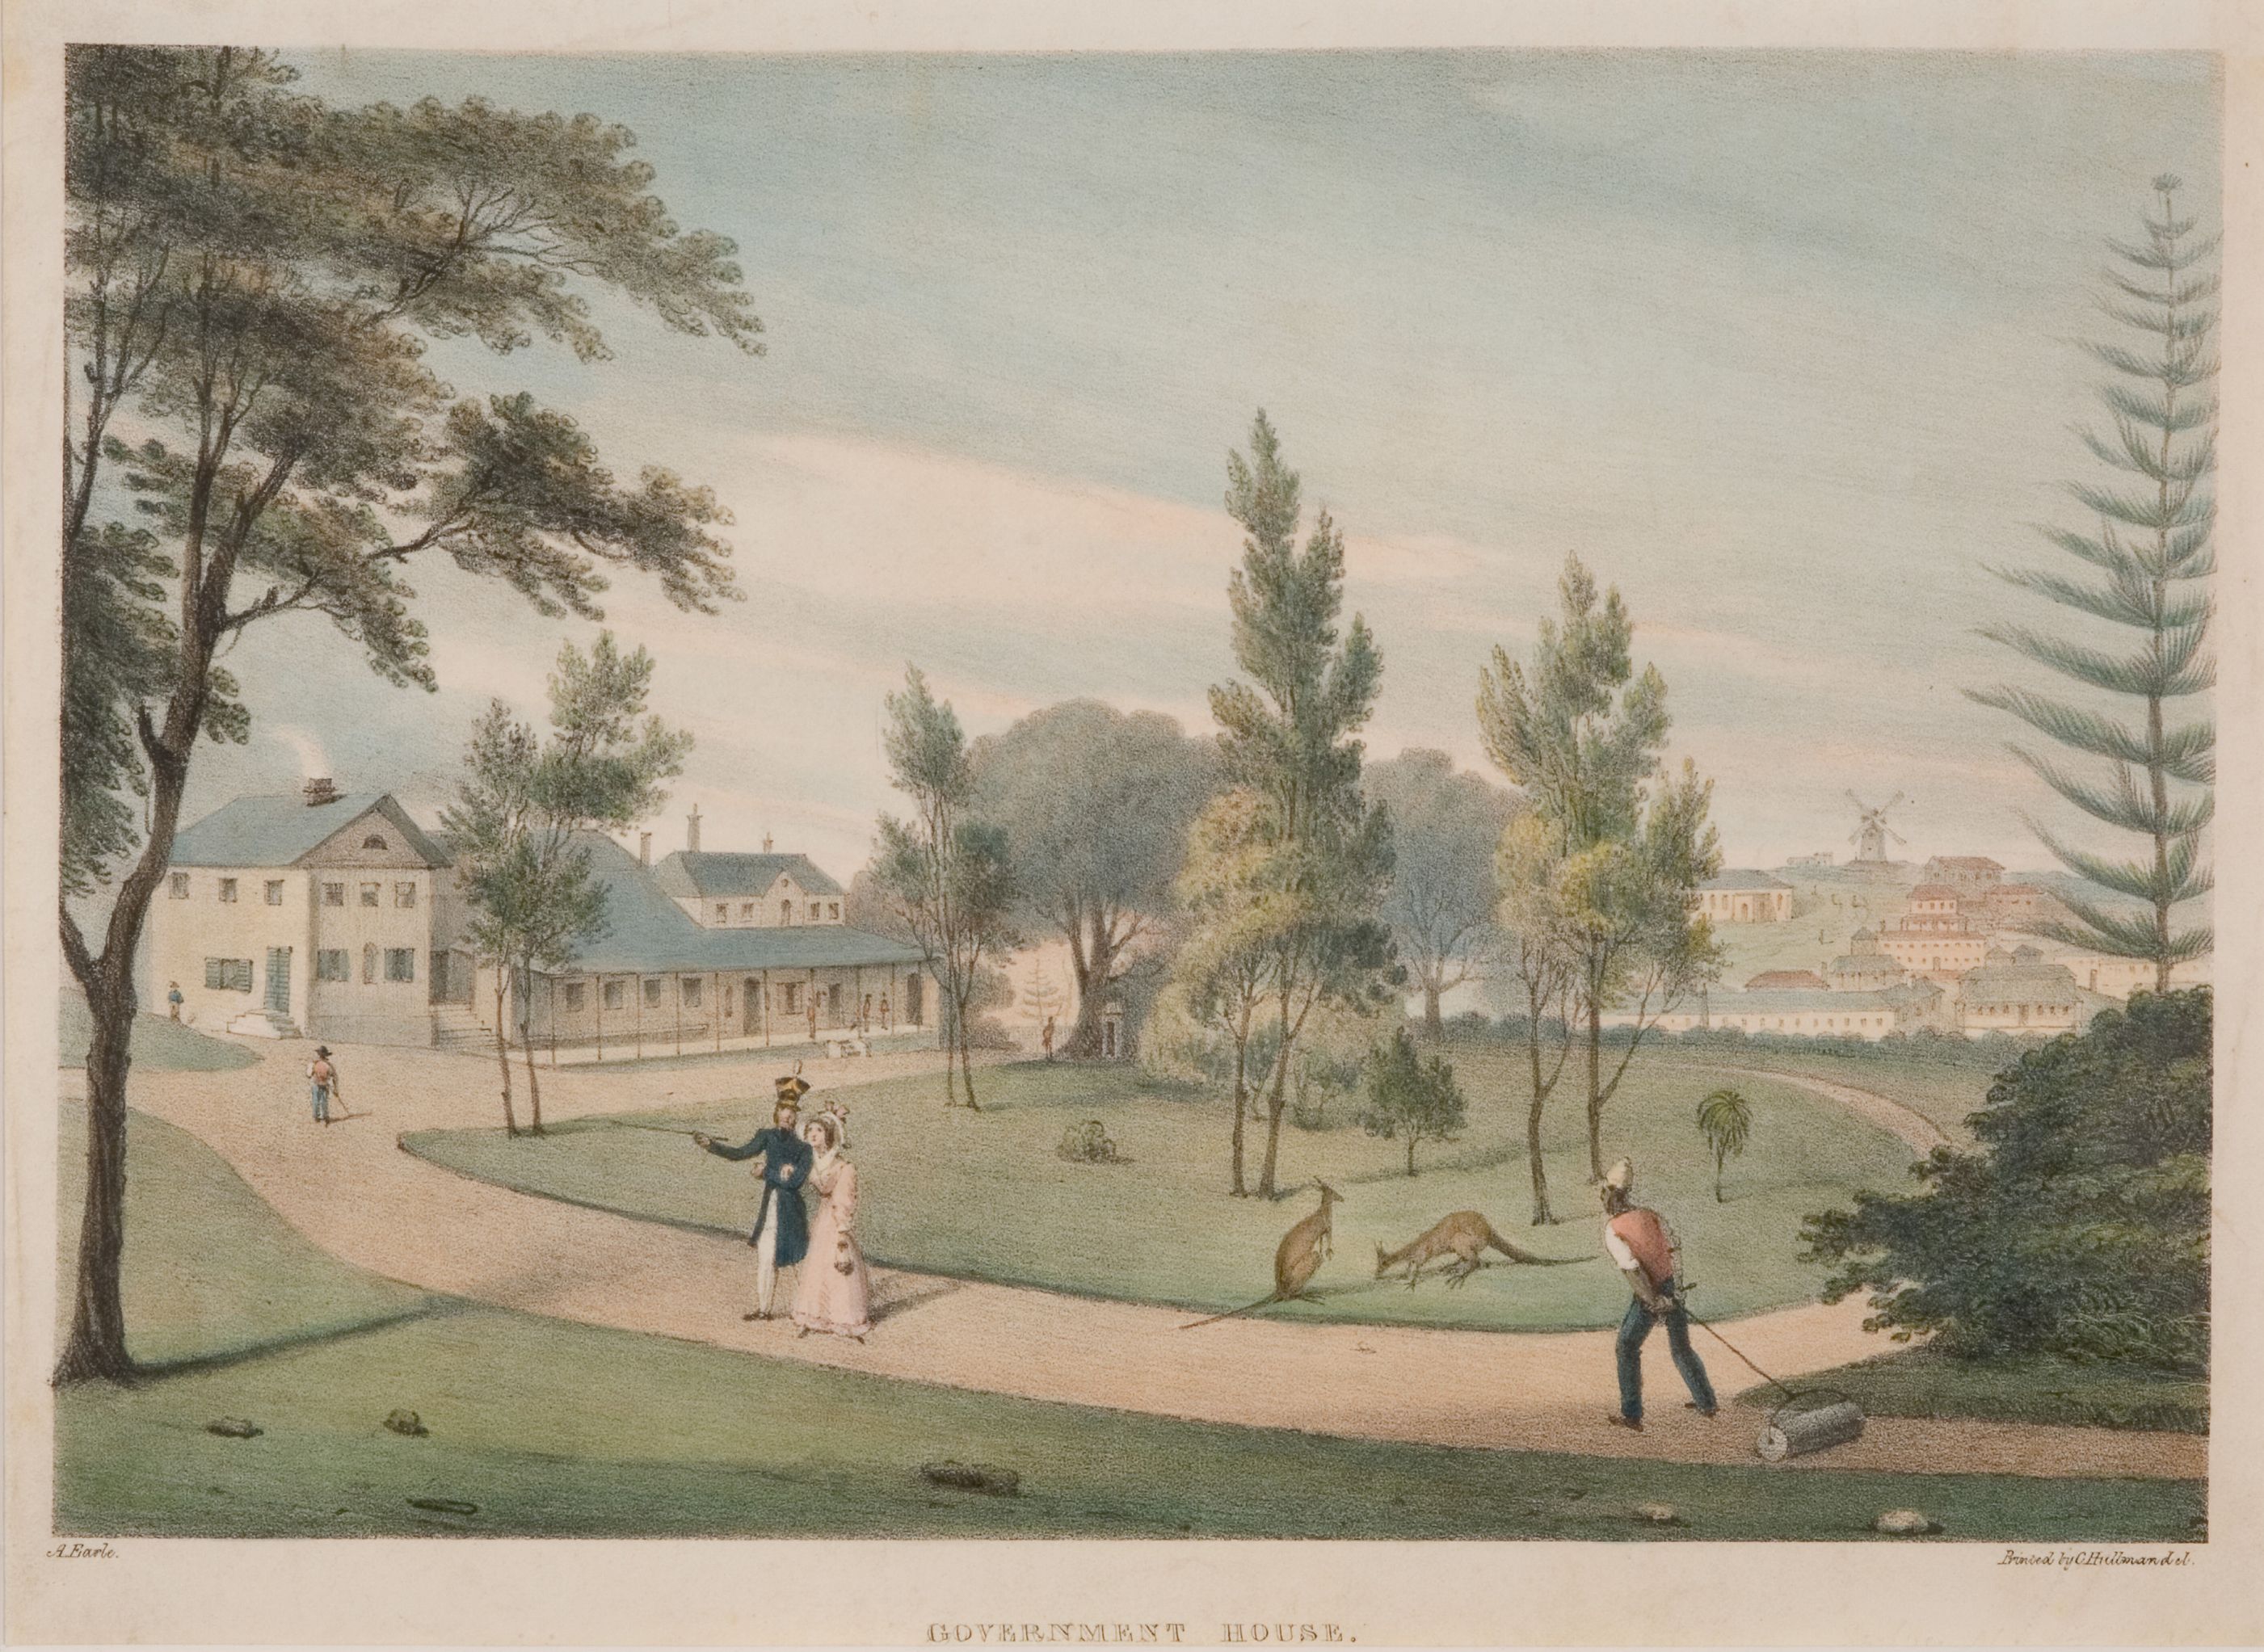 Painting of the garden area in front of a large house. Image shows a circular driveway, spare trees and lawn being grazed by kangaroosn